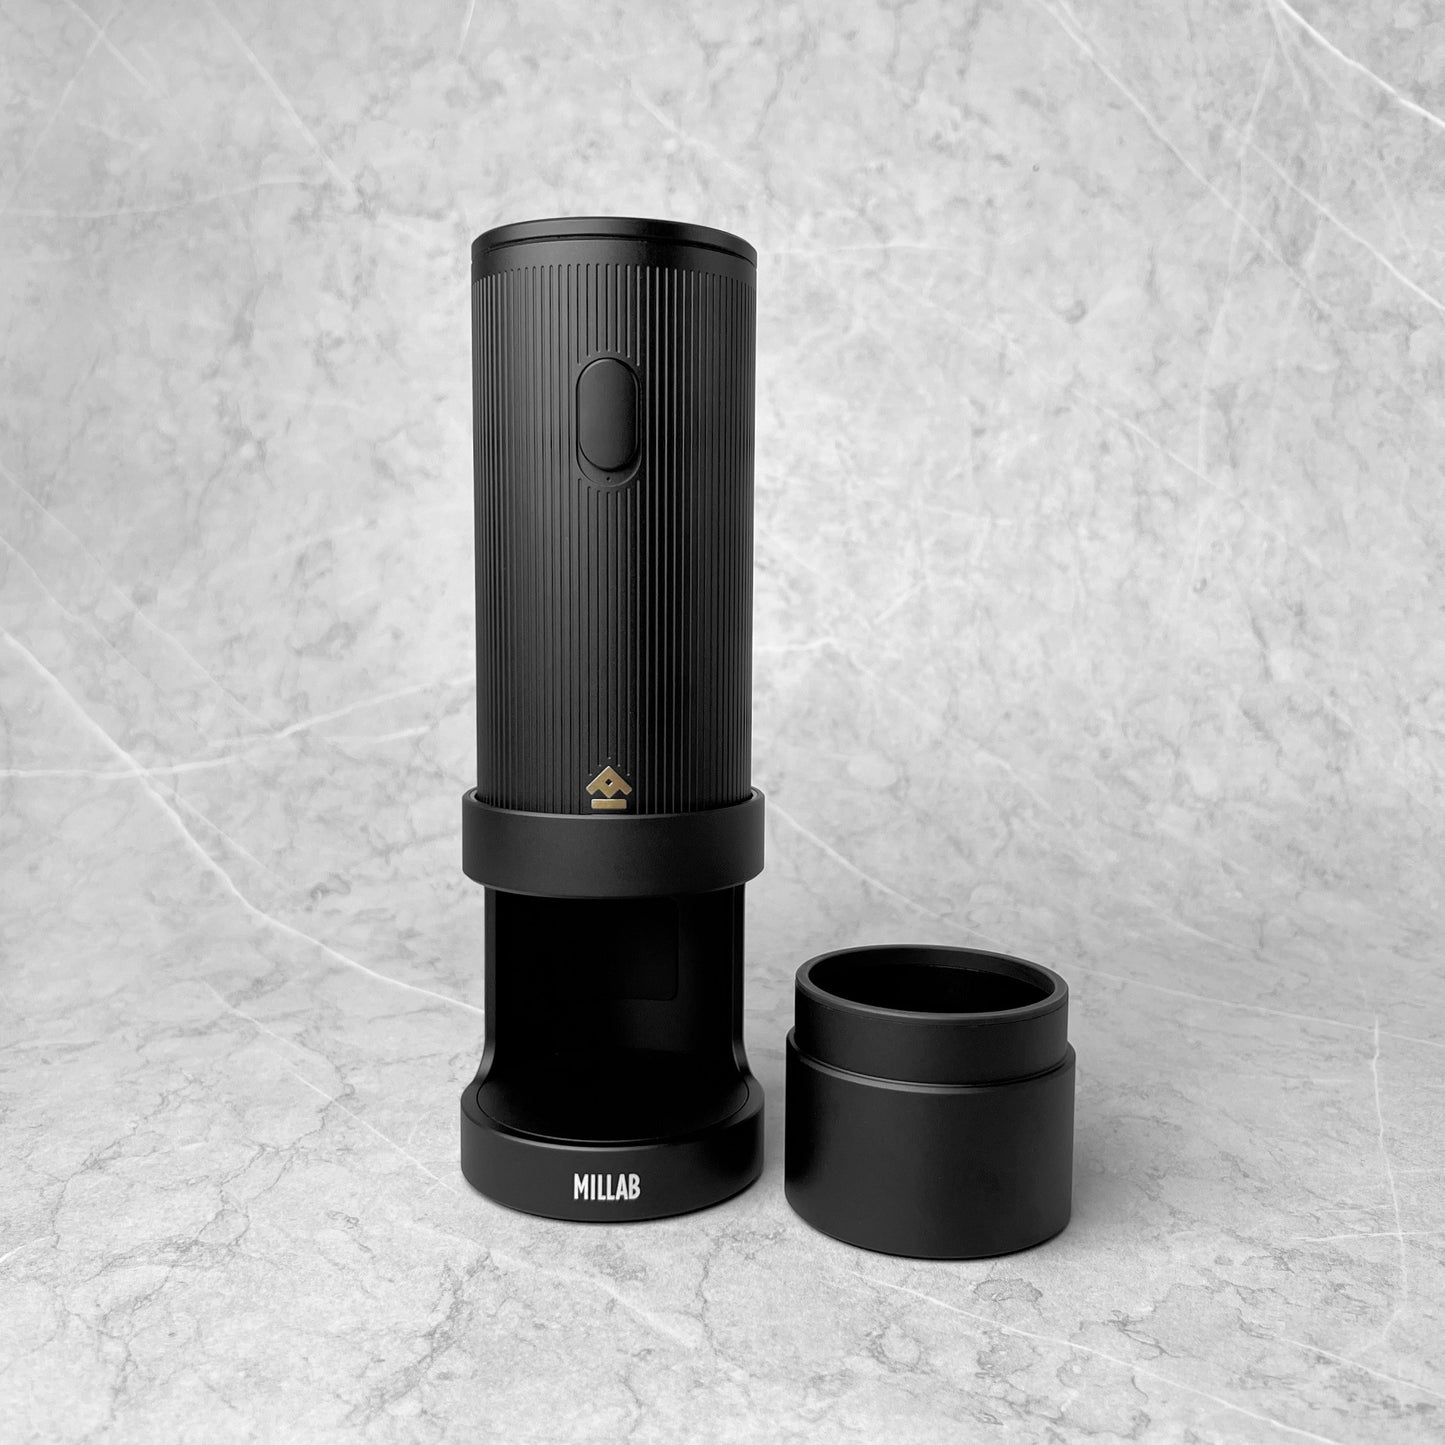 Millab x Timemore E01 Electric Coffee Grinder